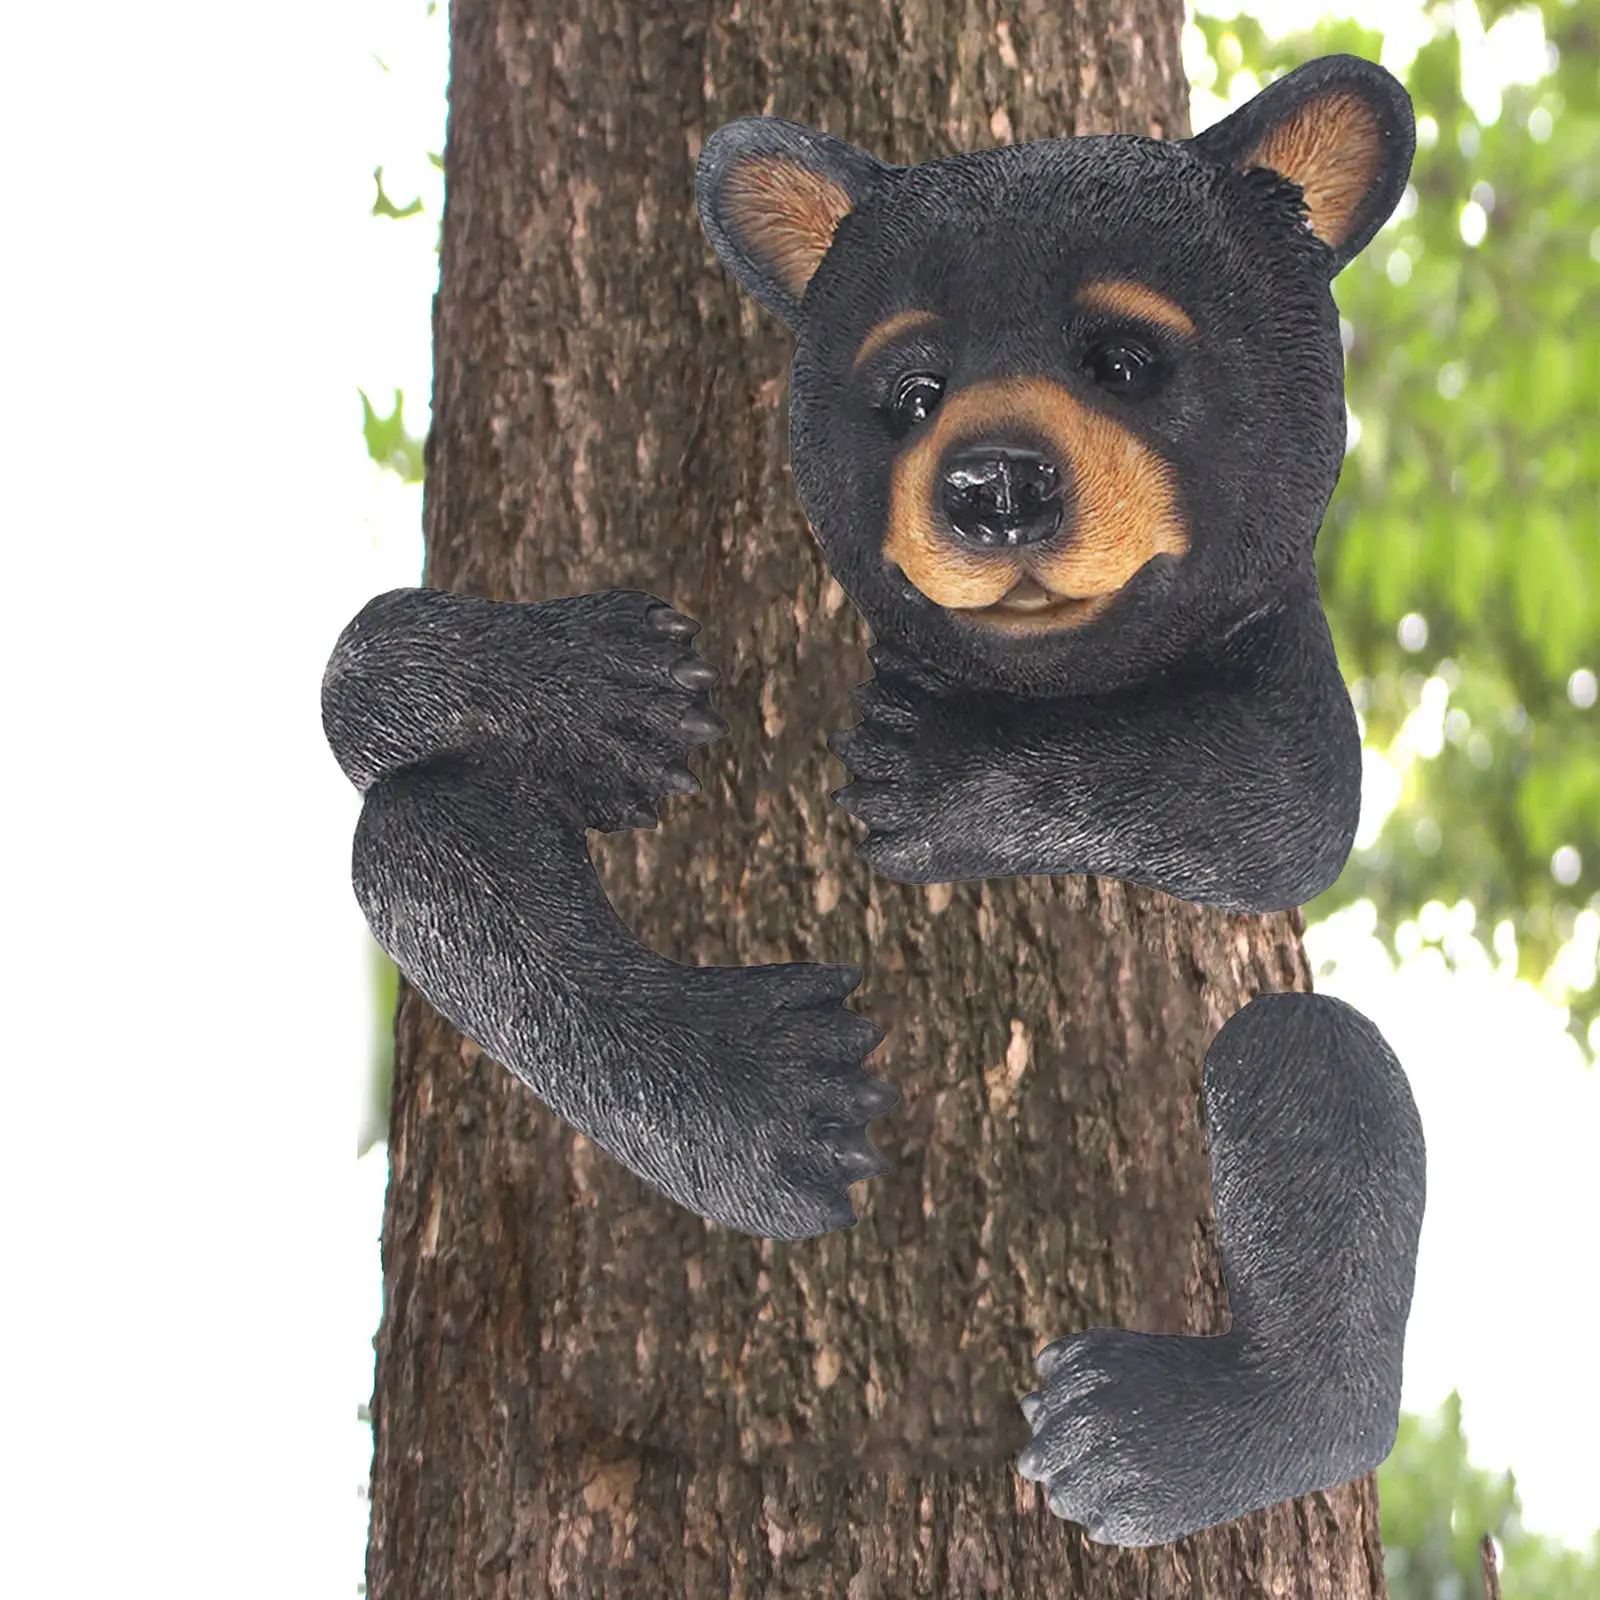 Black Bear Tree Hugger Creative Nature Lovers Gifts Home Garden Decorations Crafts